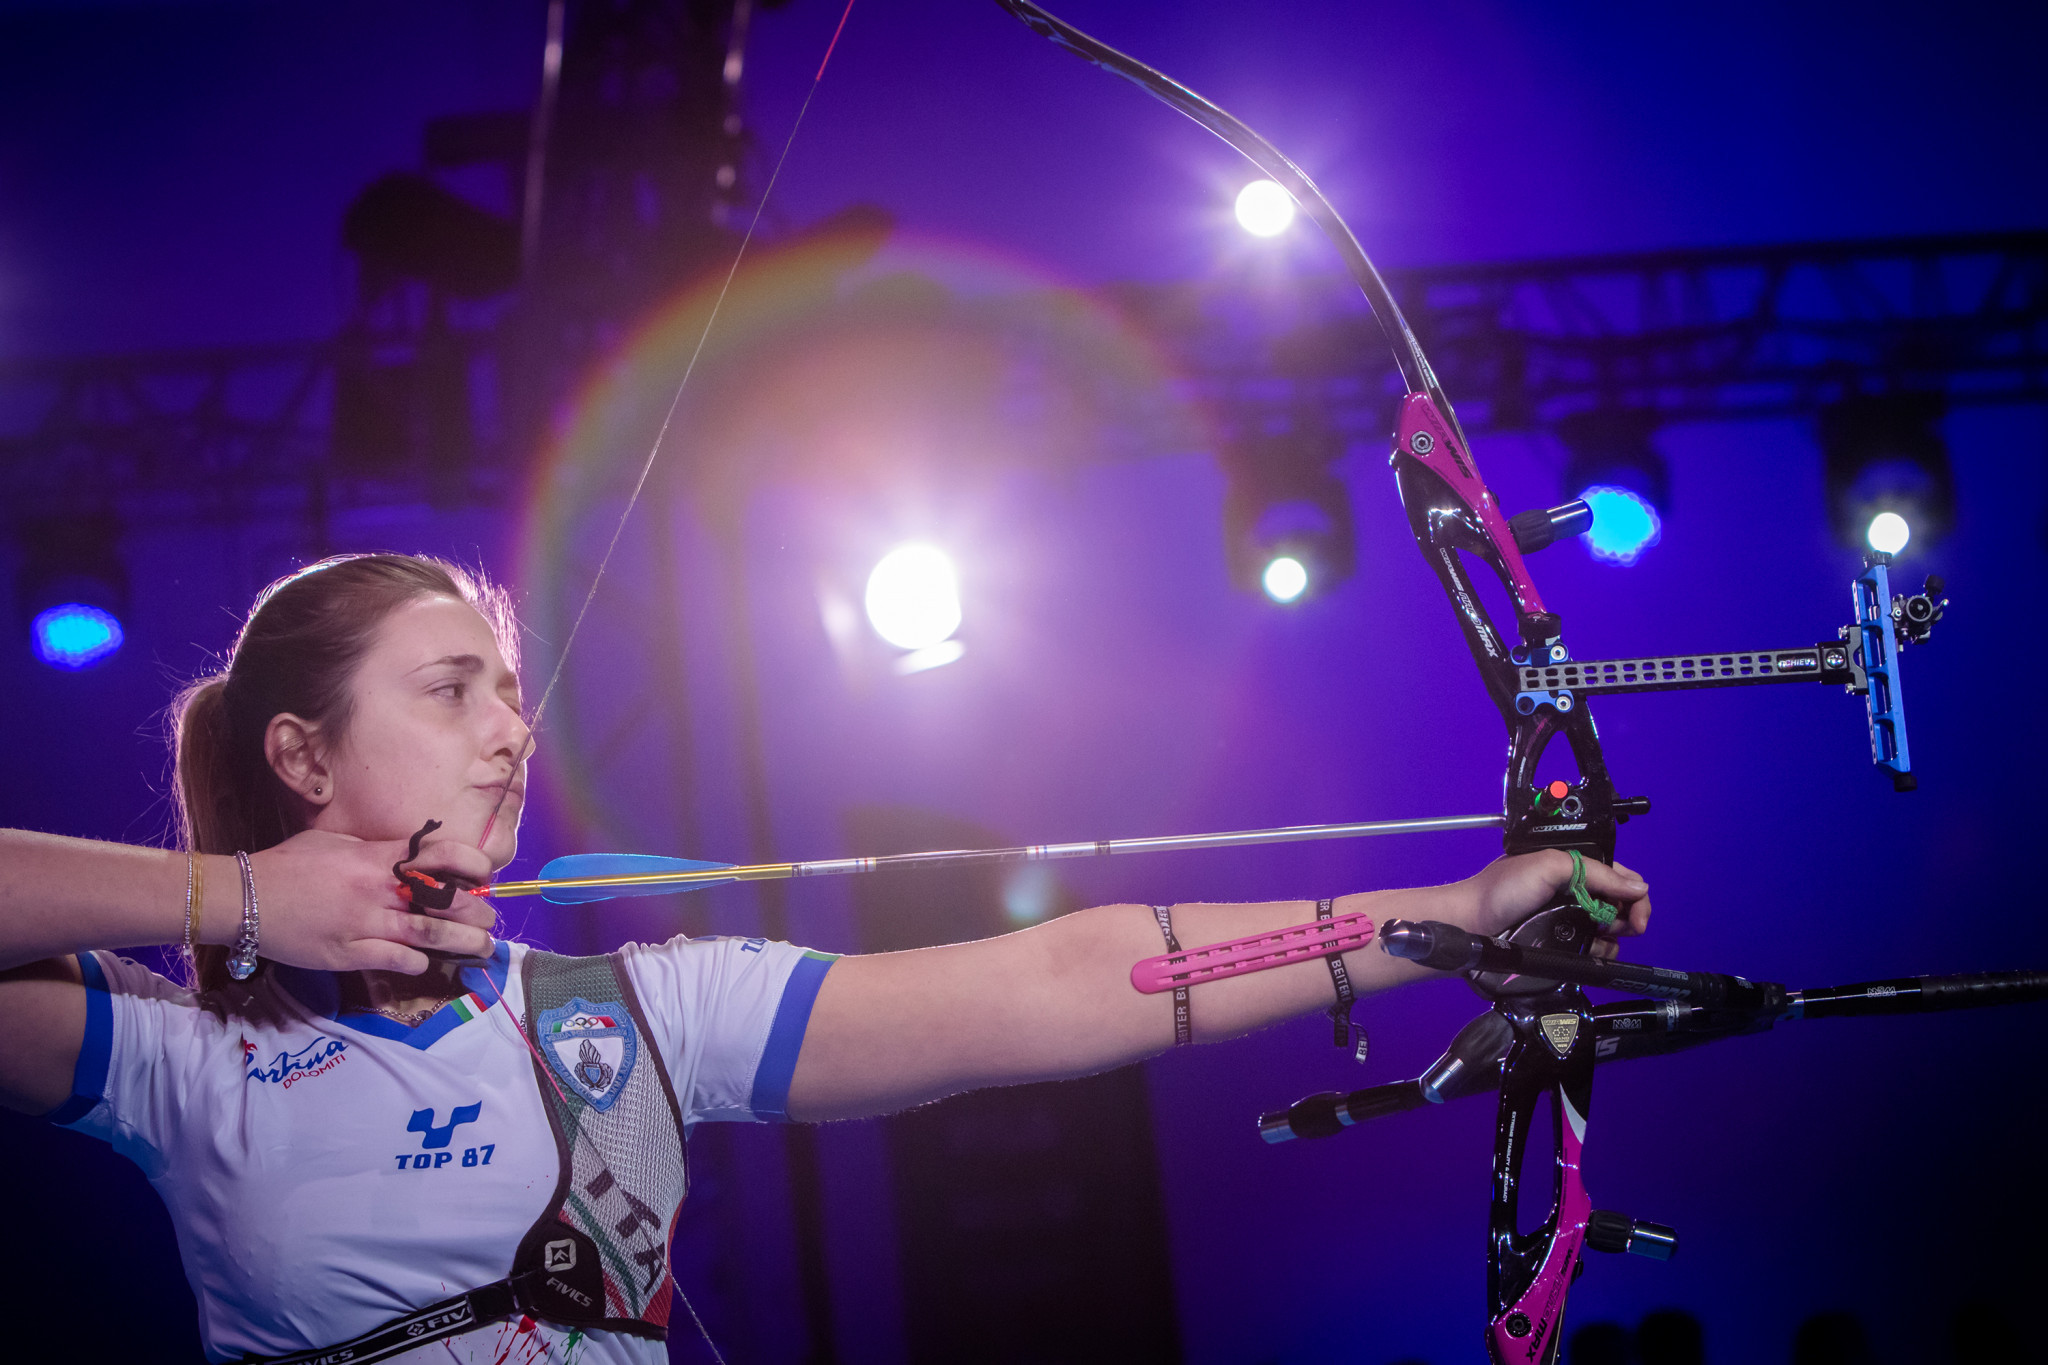 Indoor archery events will soon contribute to an athlete's world ranking ©Getty Images